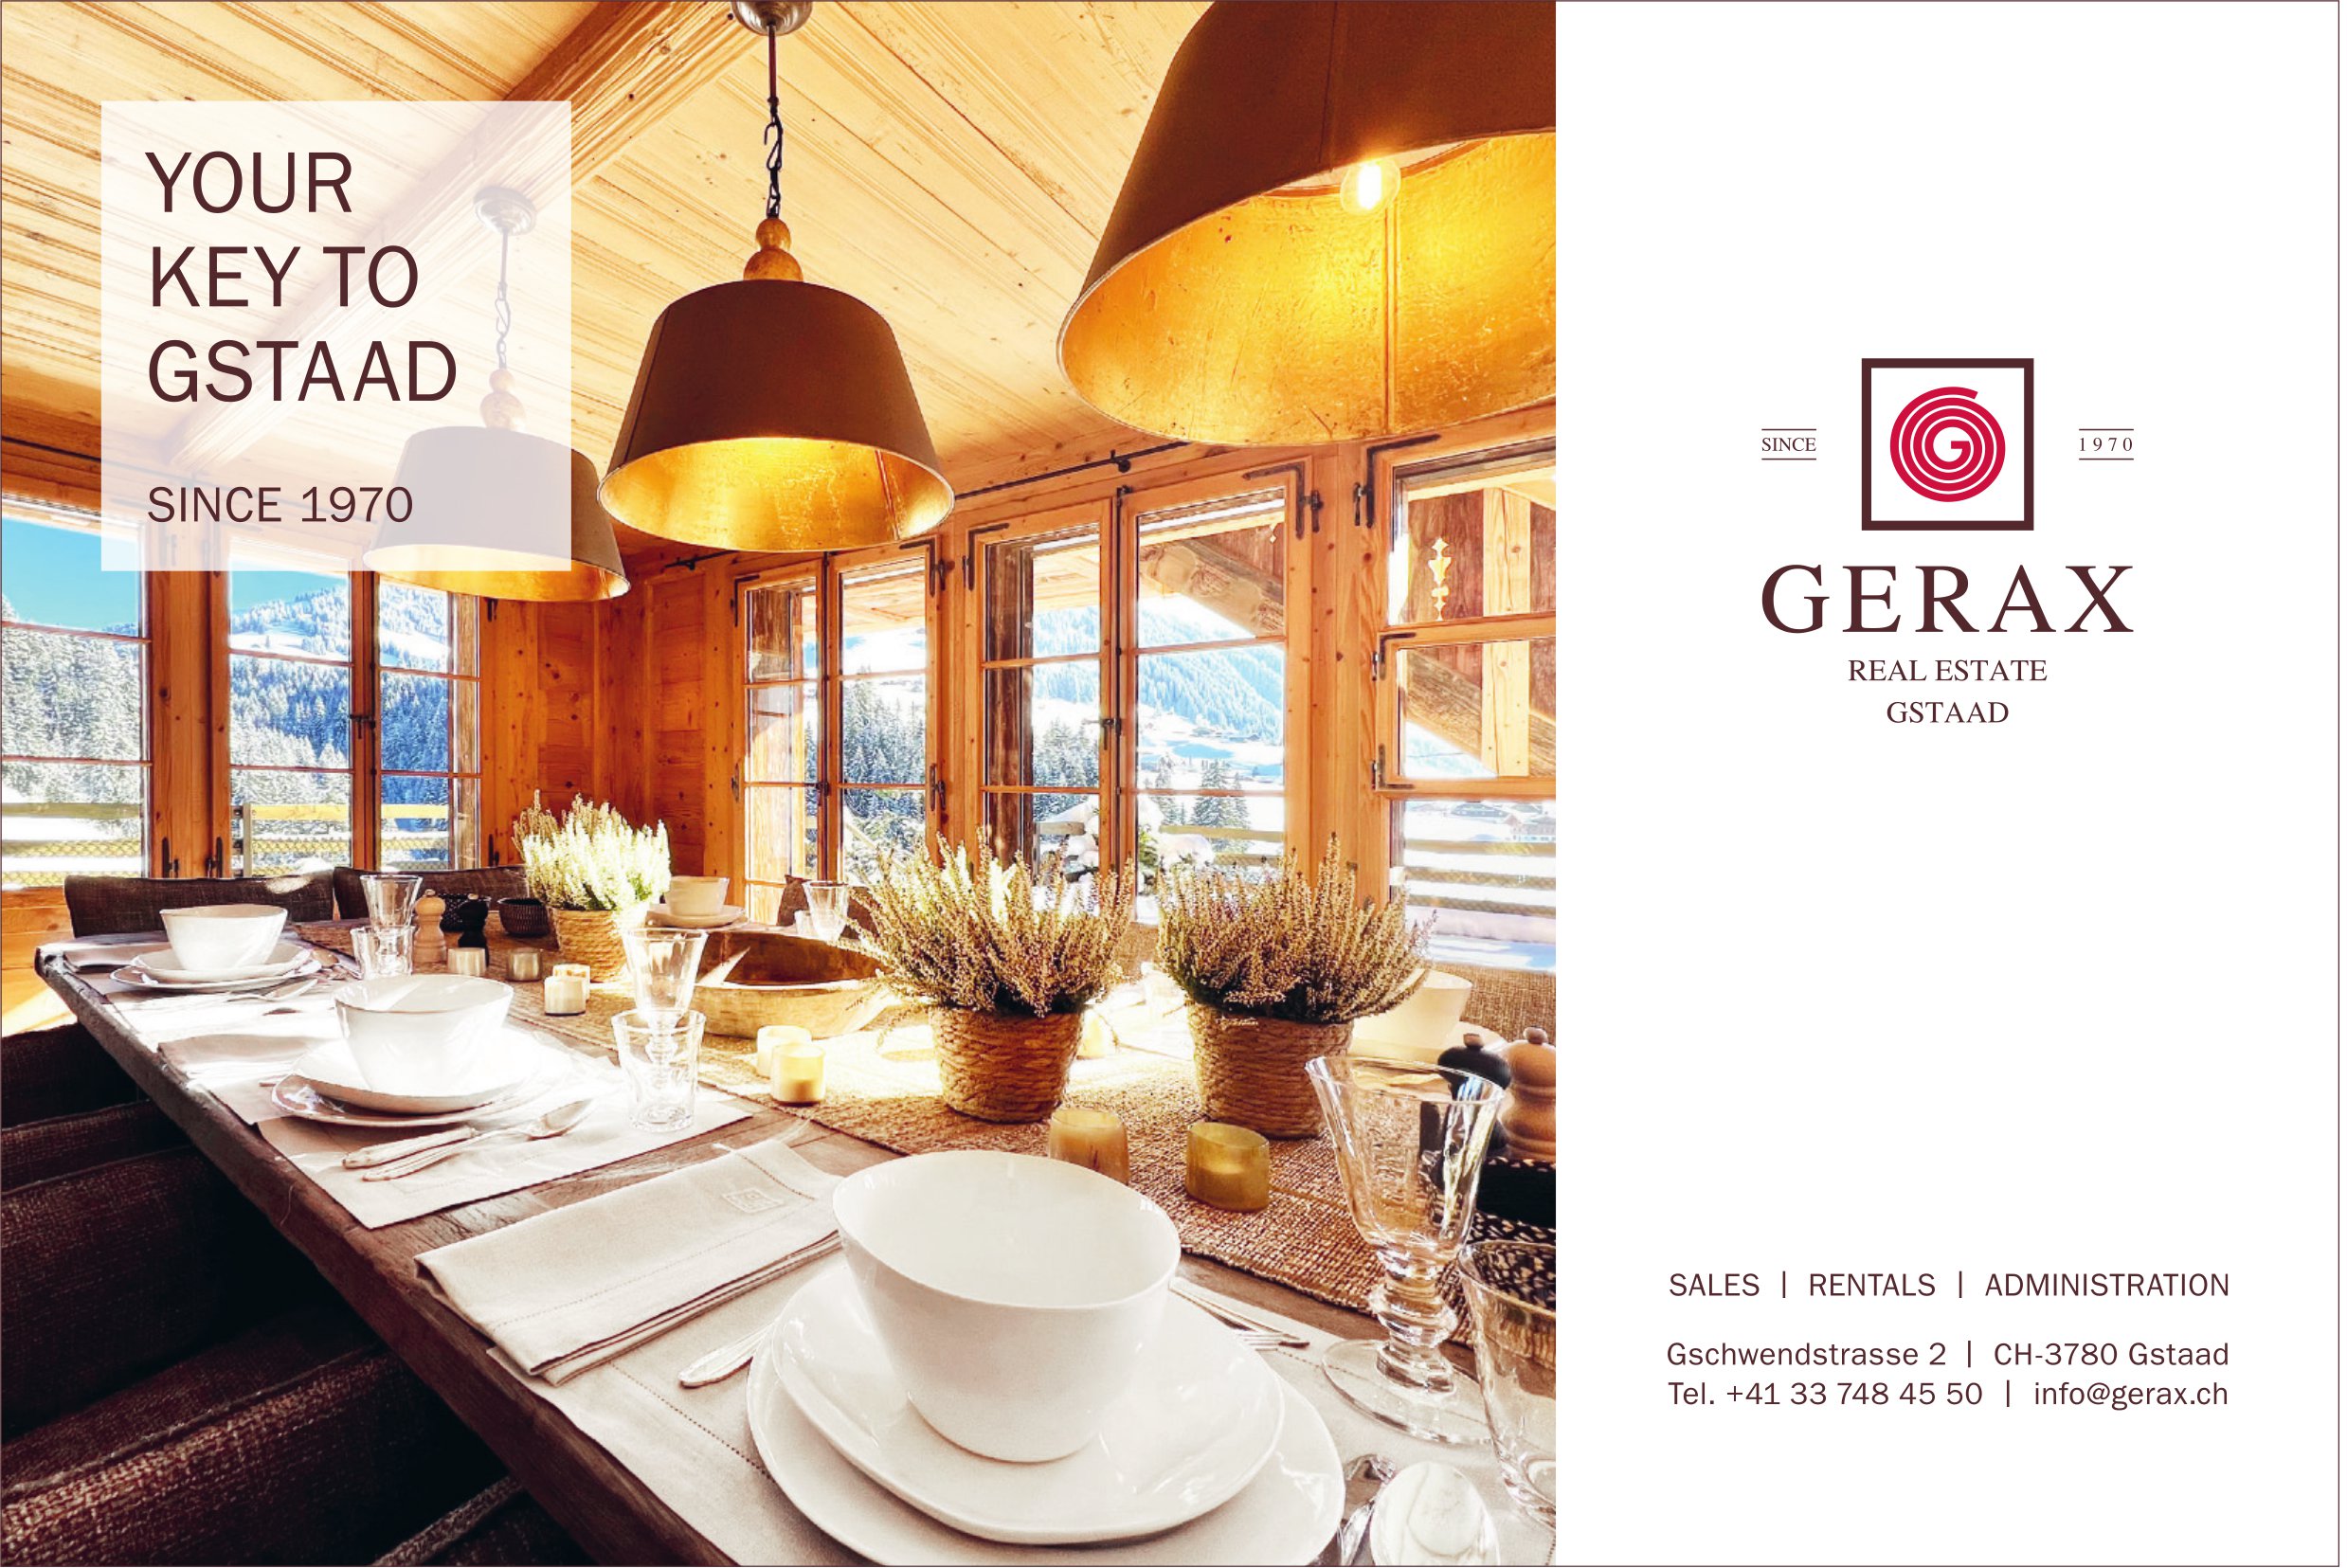 Gerax Real Estate - Your key to Gstaad